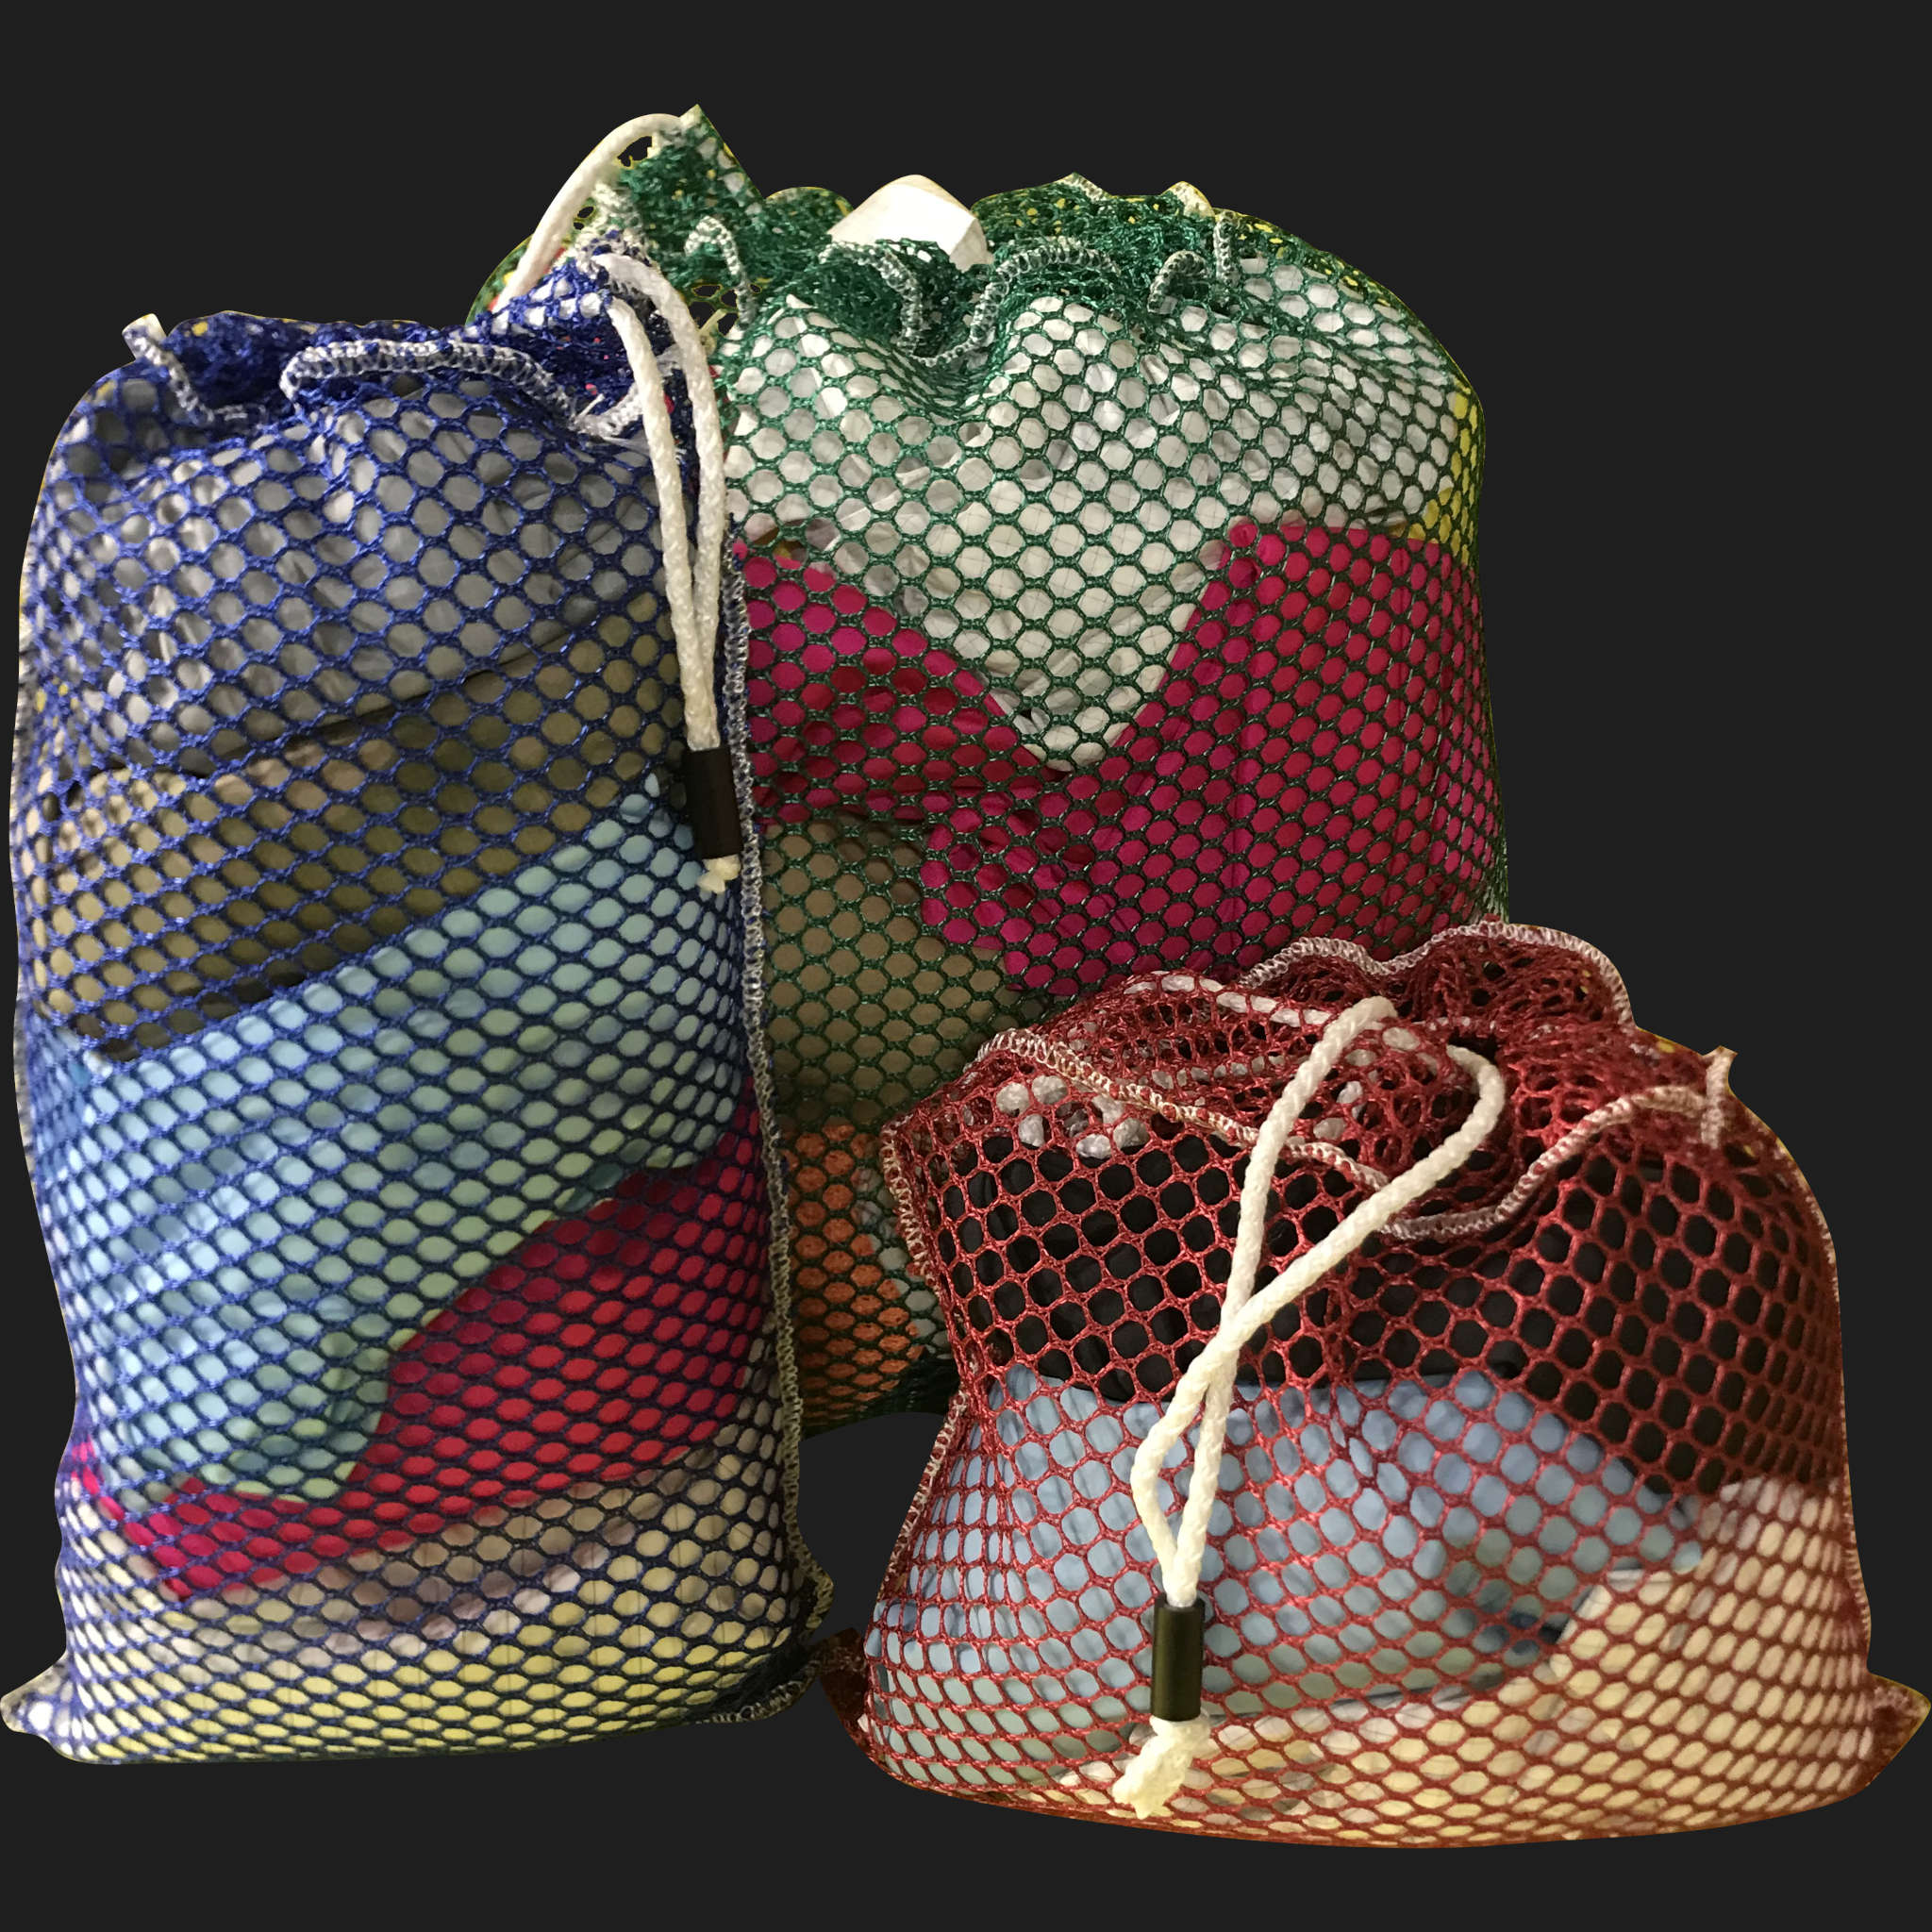 32" x 46" Customized Mesh-Net-Laundry Bags Heavy Duty with Cord and barrellock closure